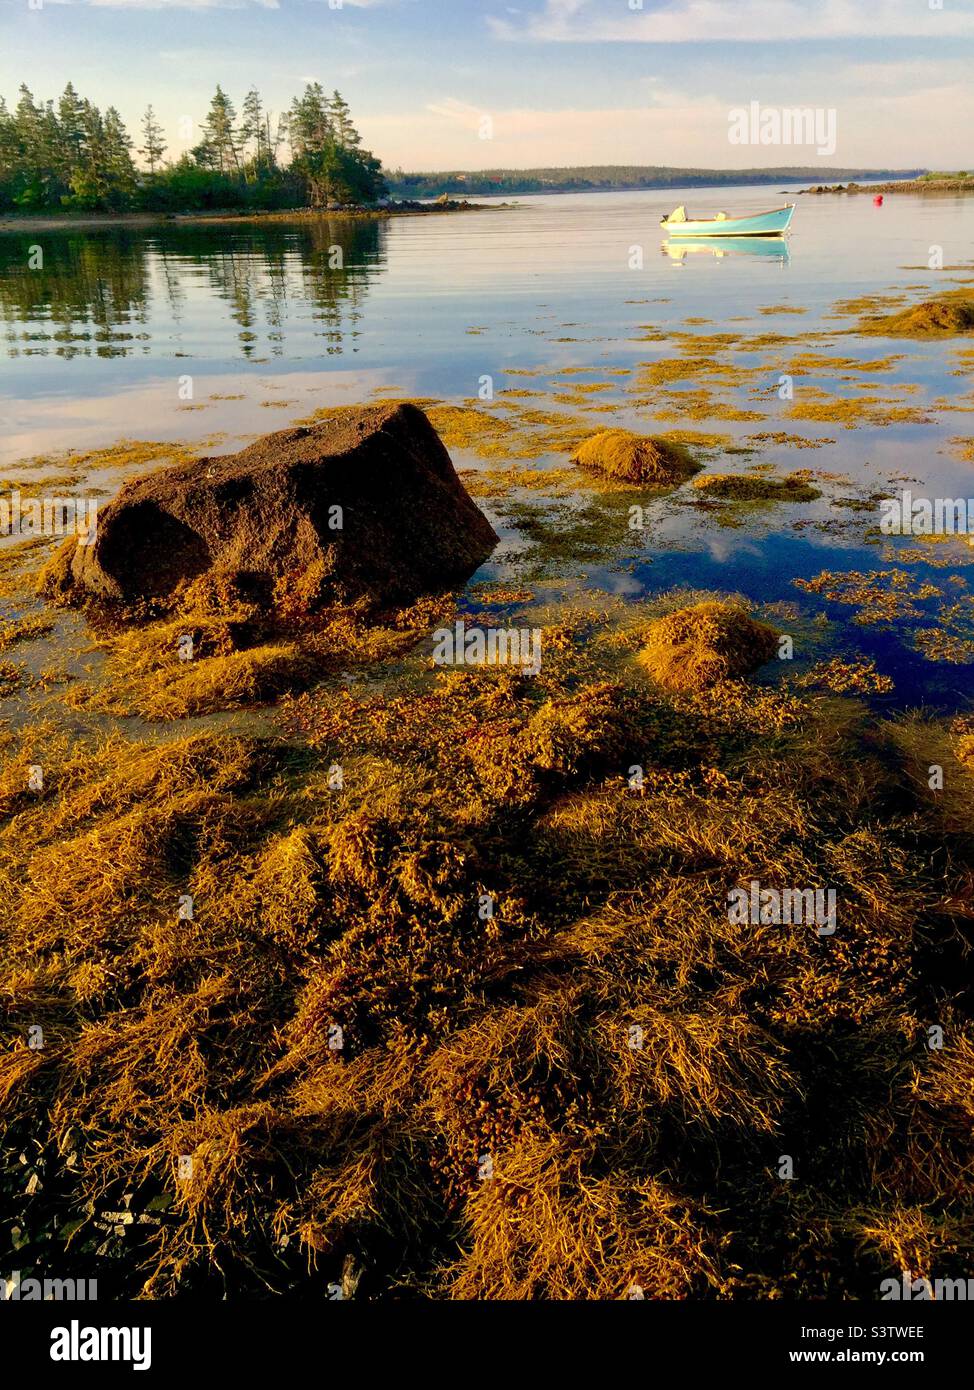 Sunrise at low tide, from a cove of the Atlantic Ocean, Halifax, Canada. A blue boat moored beyond the shallows. Seaweed and a big rock glistening in the foreground. Stock Photo